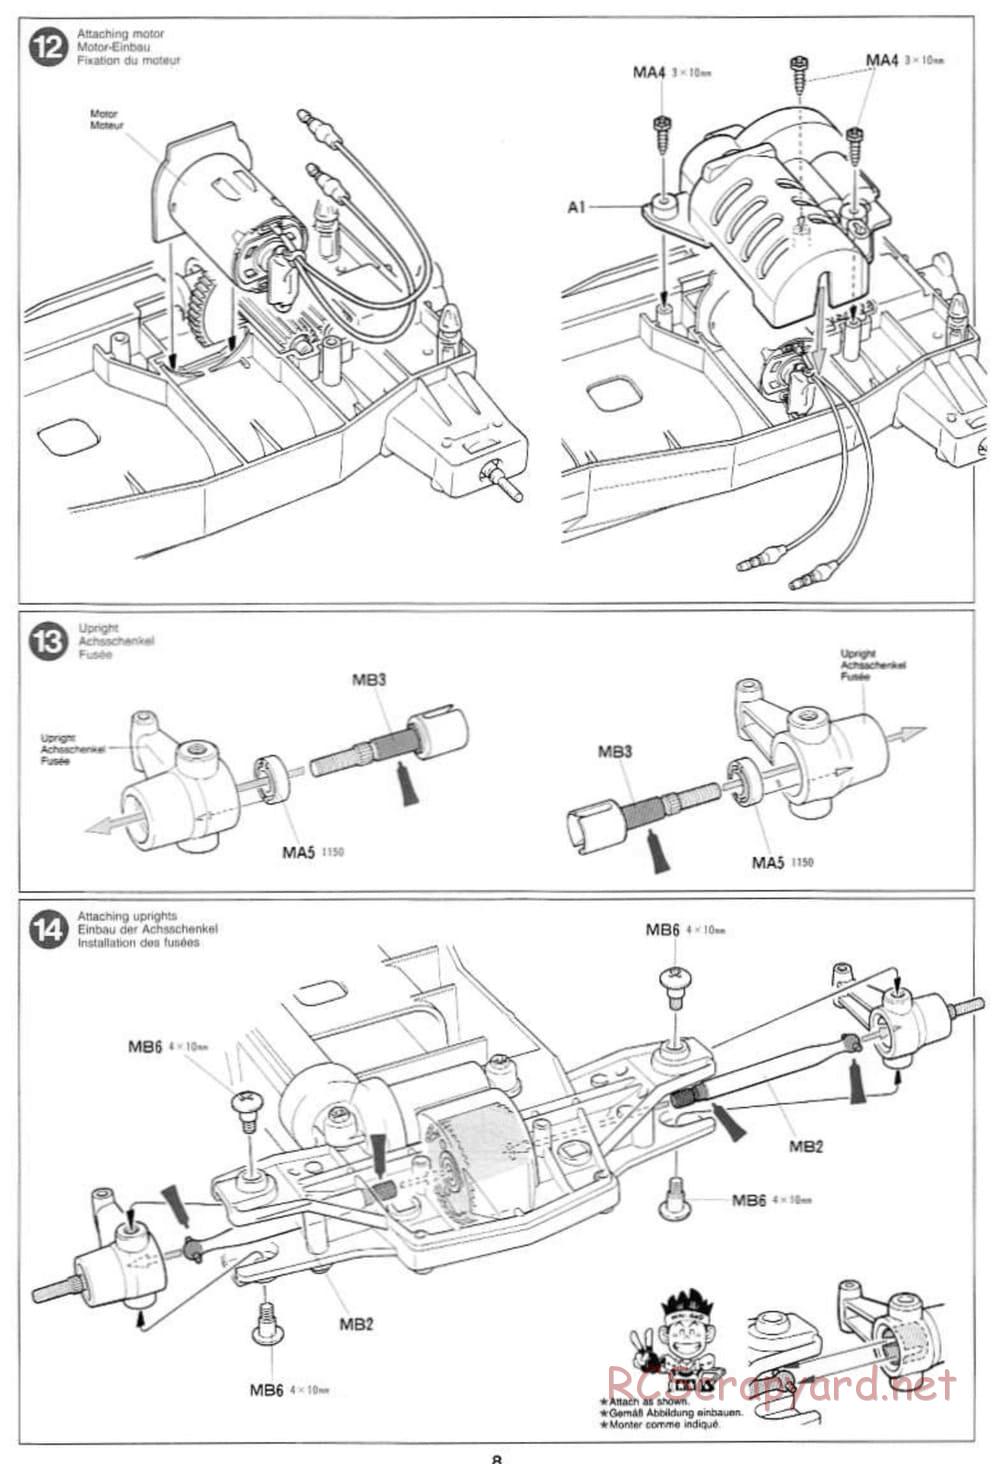 Tamiya - Wild Ceptor - Boy's 4WD Chassis - Manual - Page 8